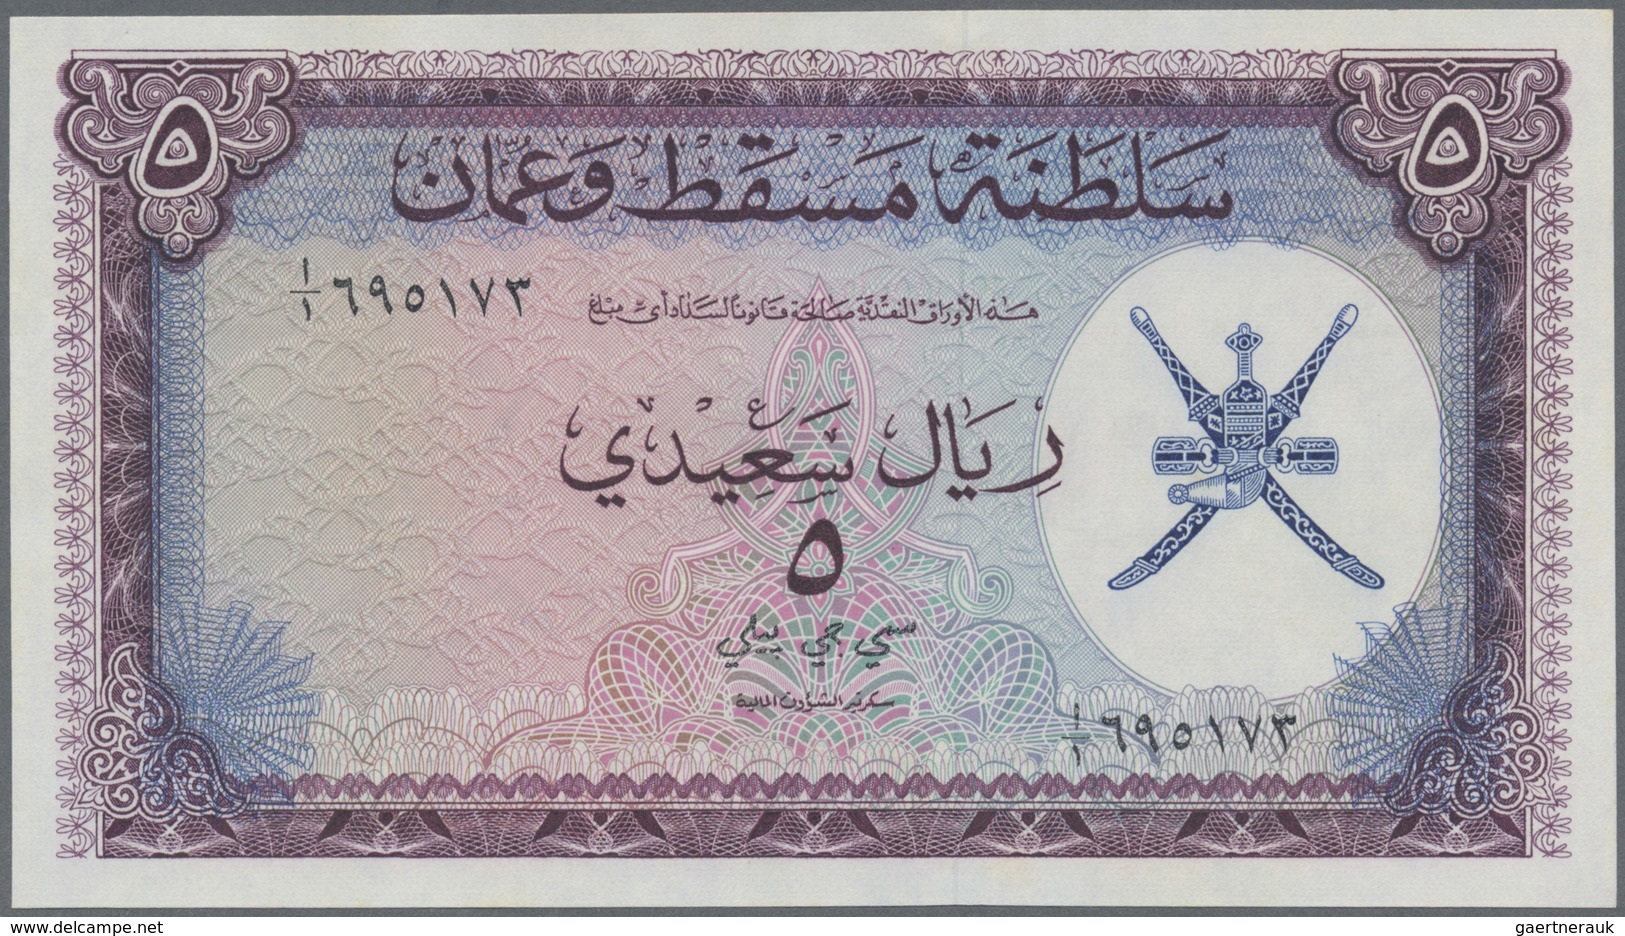 Oman: Sulatanate Of Muscat And Oman, Set With 6 Banknotes Comprising 100 Baiza, 1/4, 1/2, 1, 5 And 1 - Oman